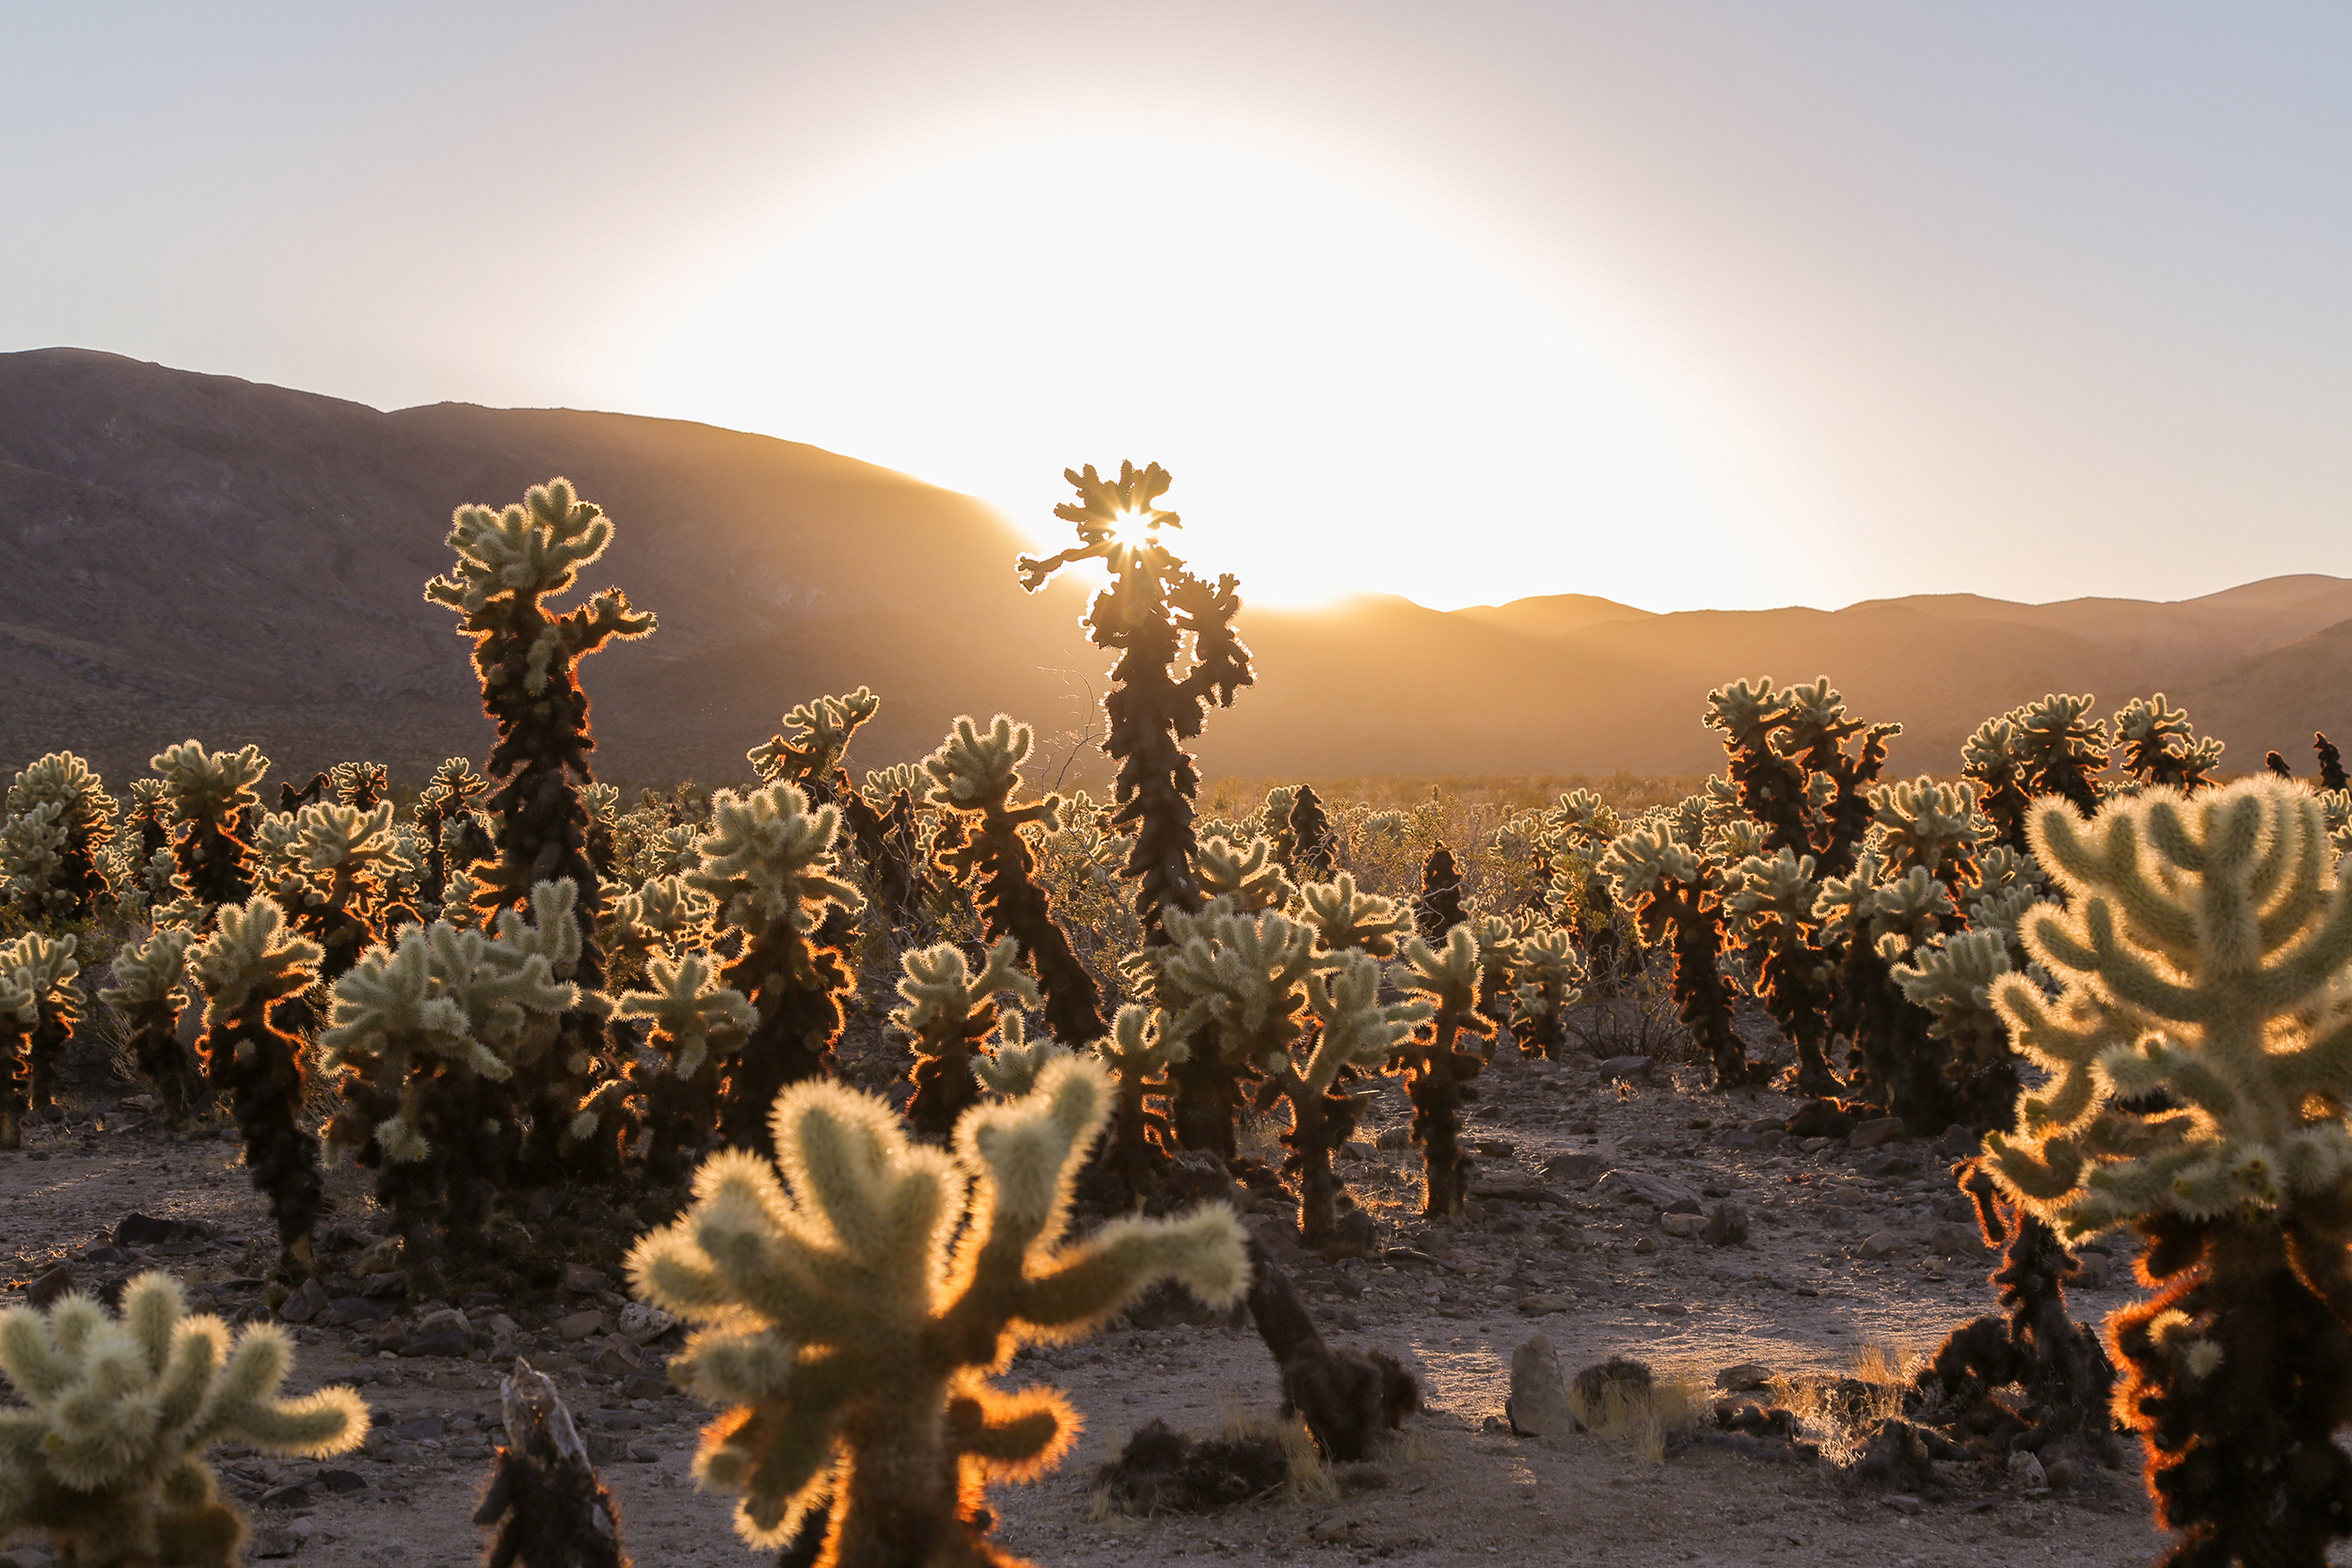 Sunset view of the Cholla Cactus Garden in Joshua Tree National Park, California.